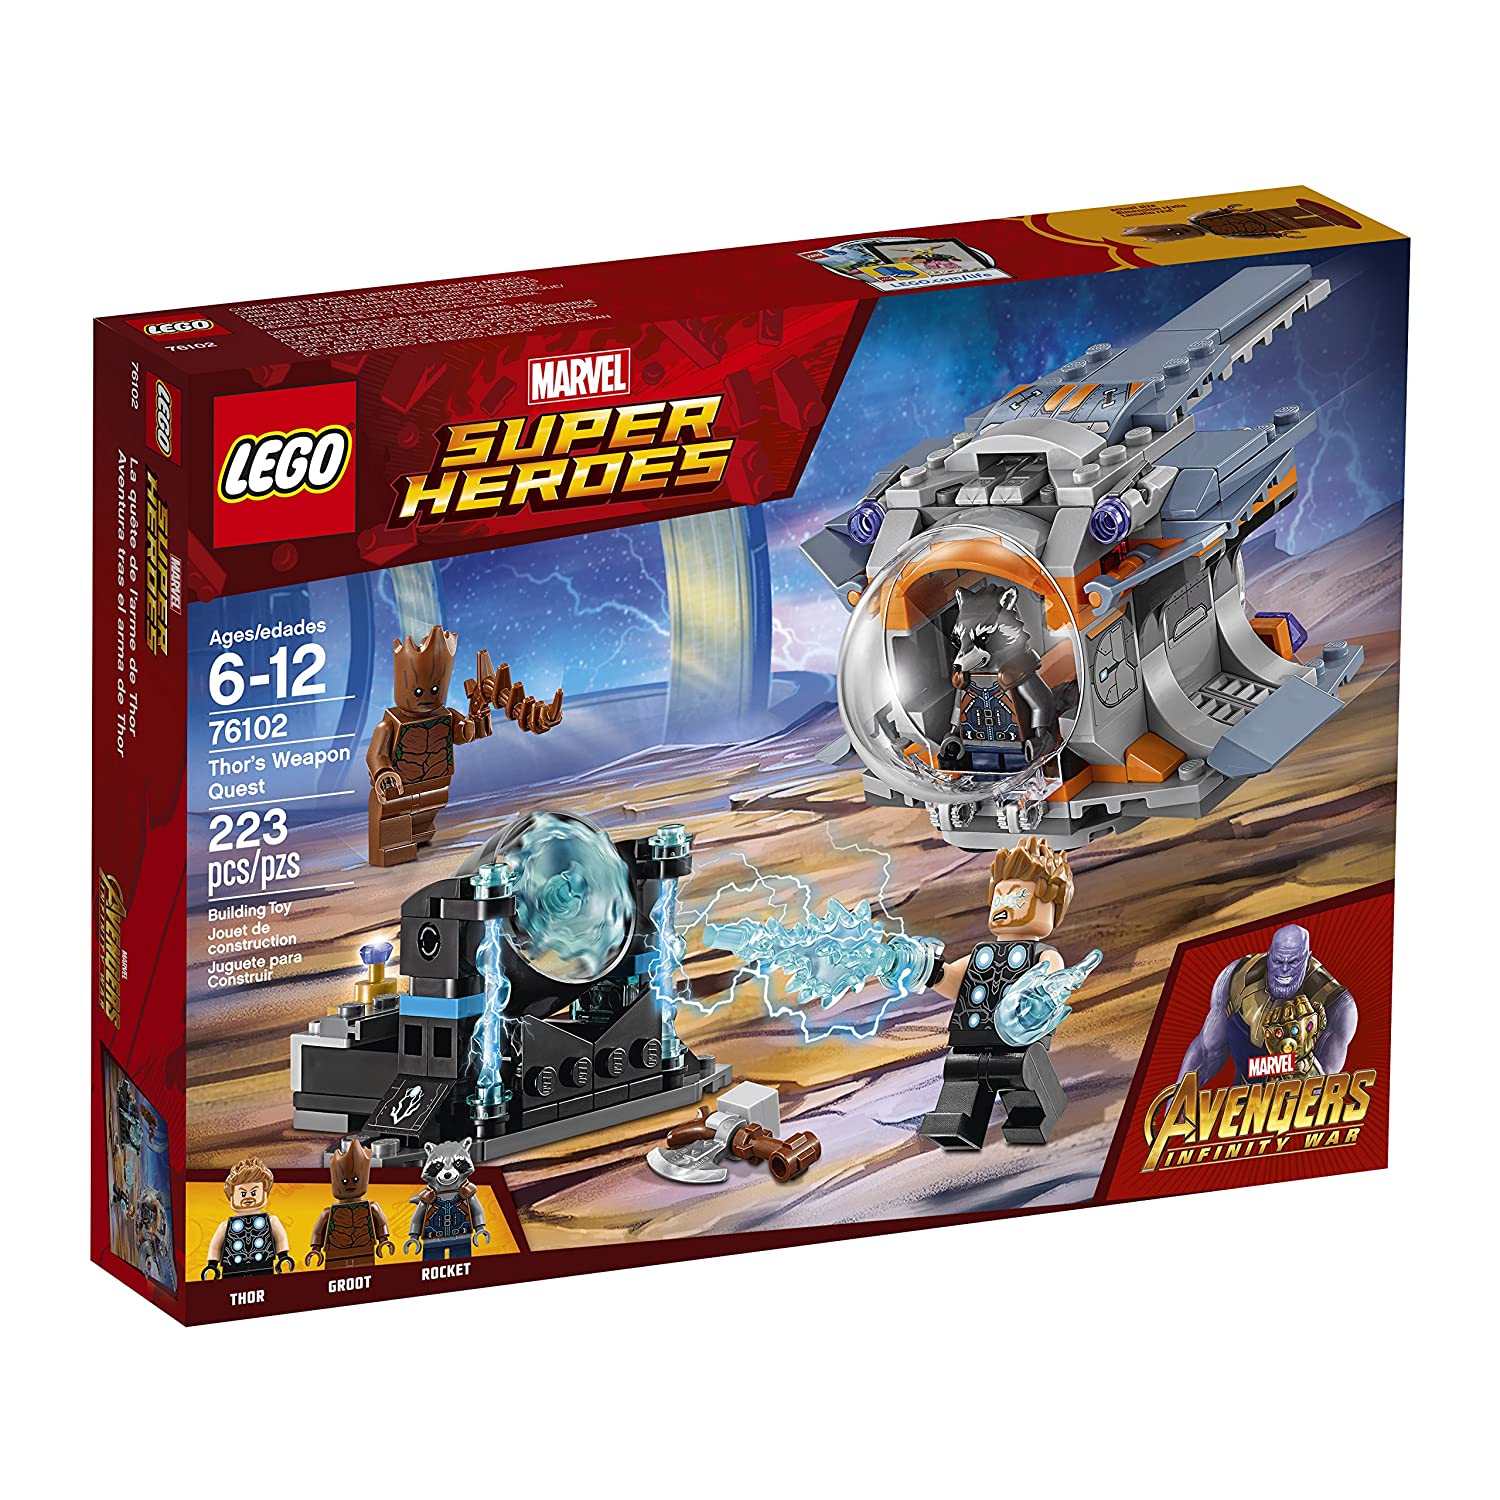 Top 9 Best LEGO Avengers Infinity War Sets Reviews in 2023 3